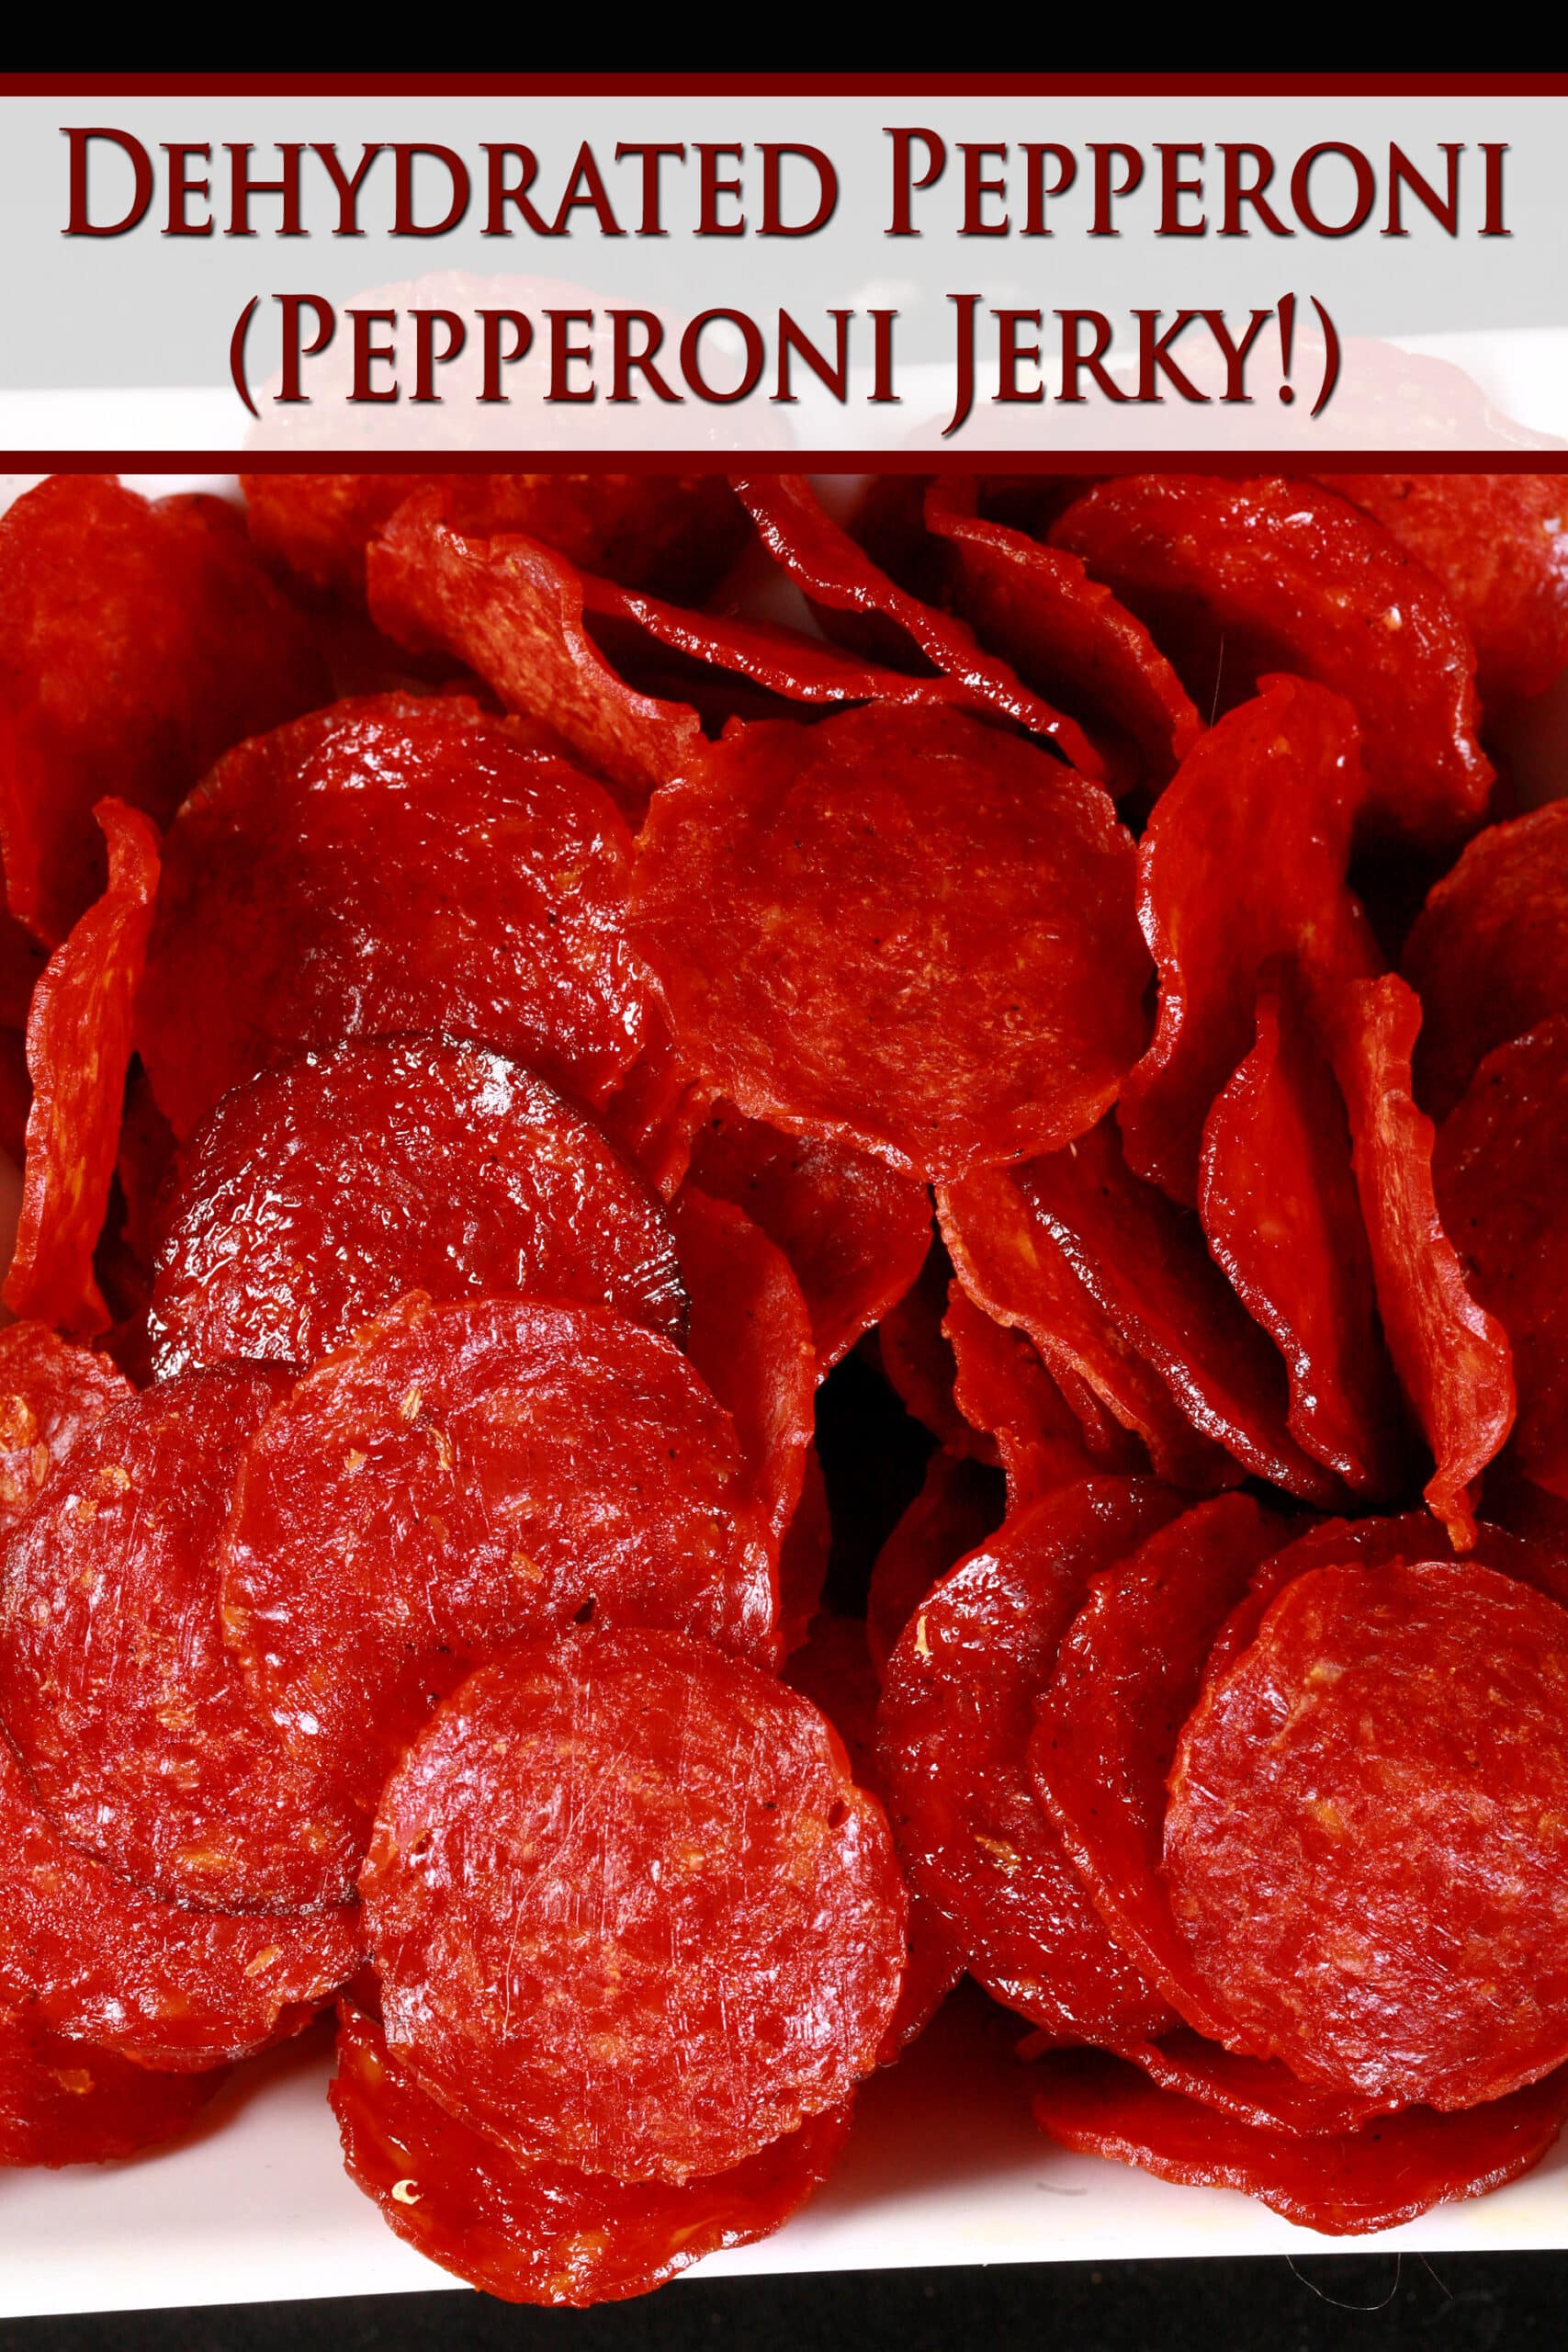 A bowl of dried pepperoni slices. Overlaid text says dehydrated pepperoni slices pepperoni jerky.